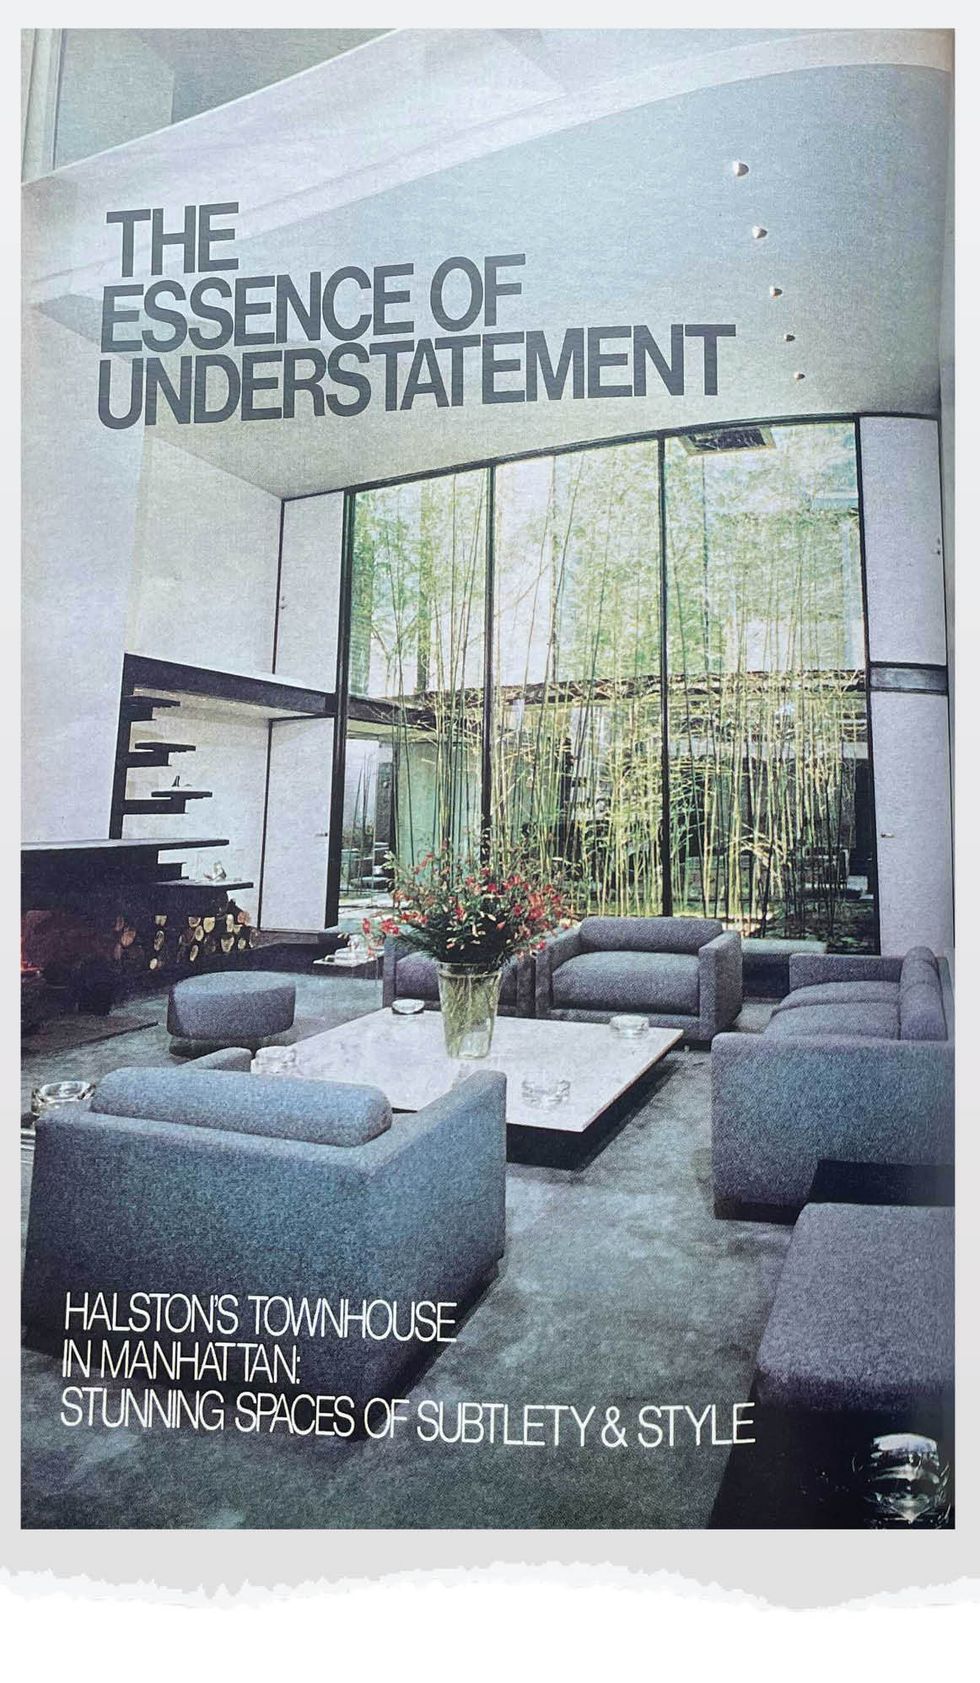 fashion designer halstons manhattan townhouse designed by paul rudolph as seen in house beautifuls october 1977 issue